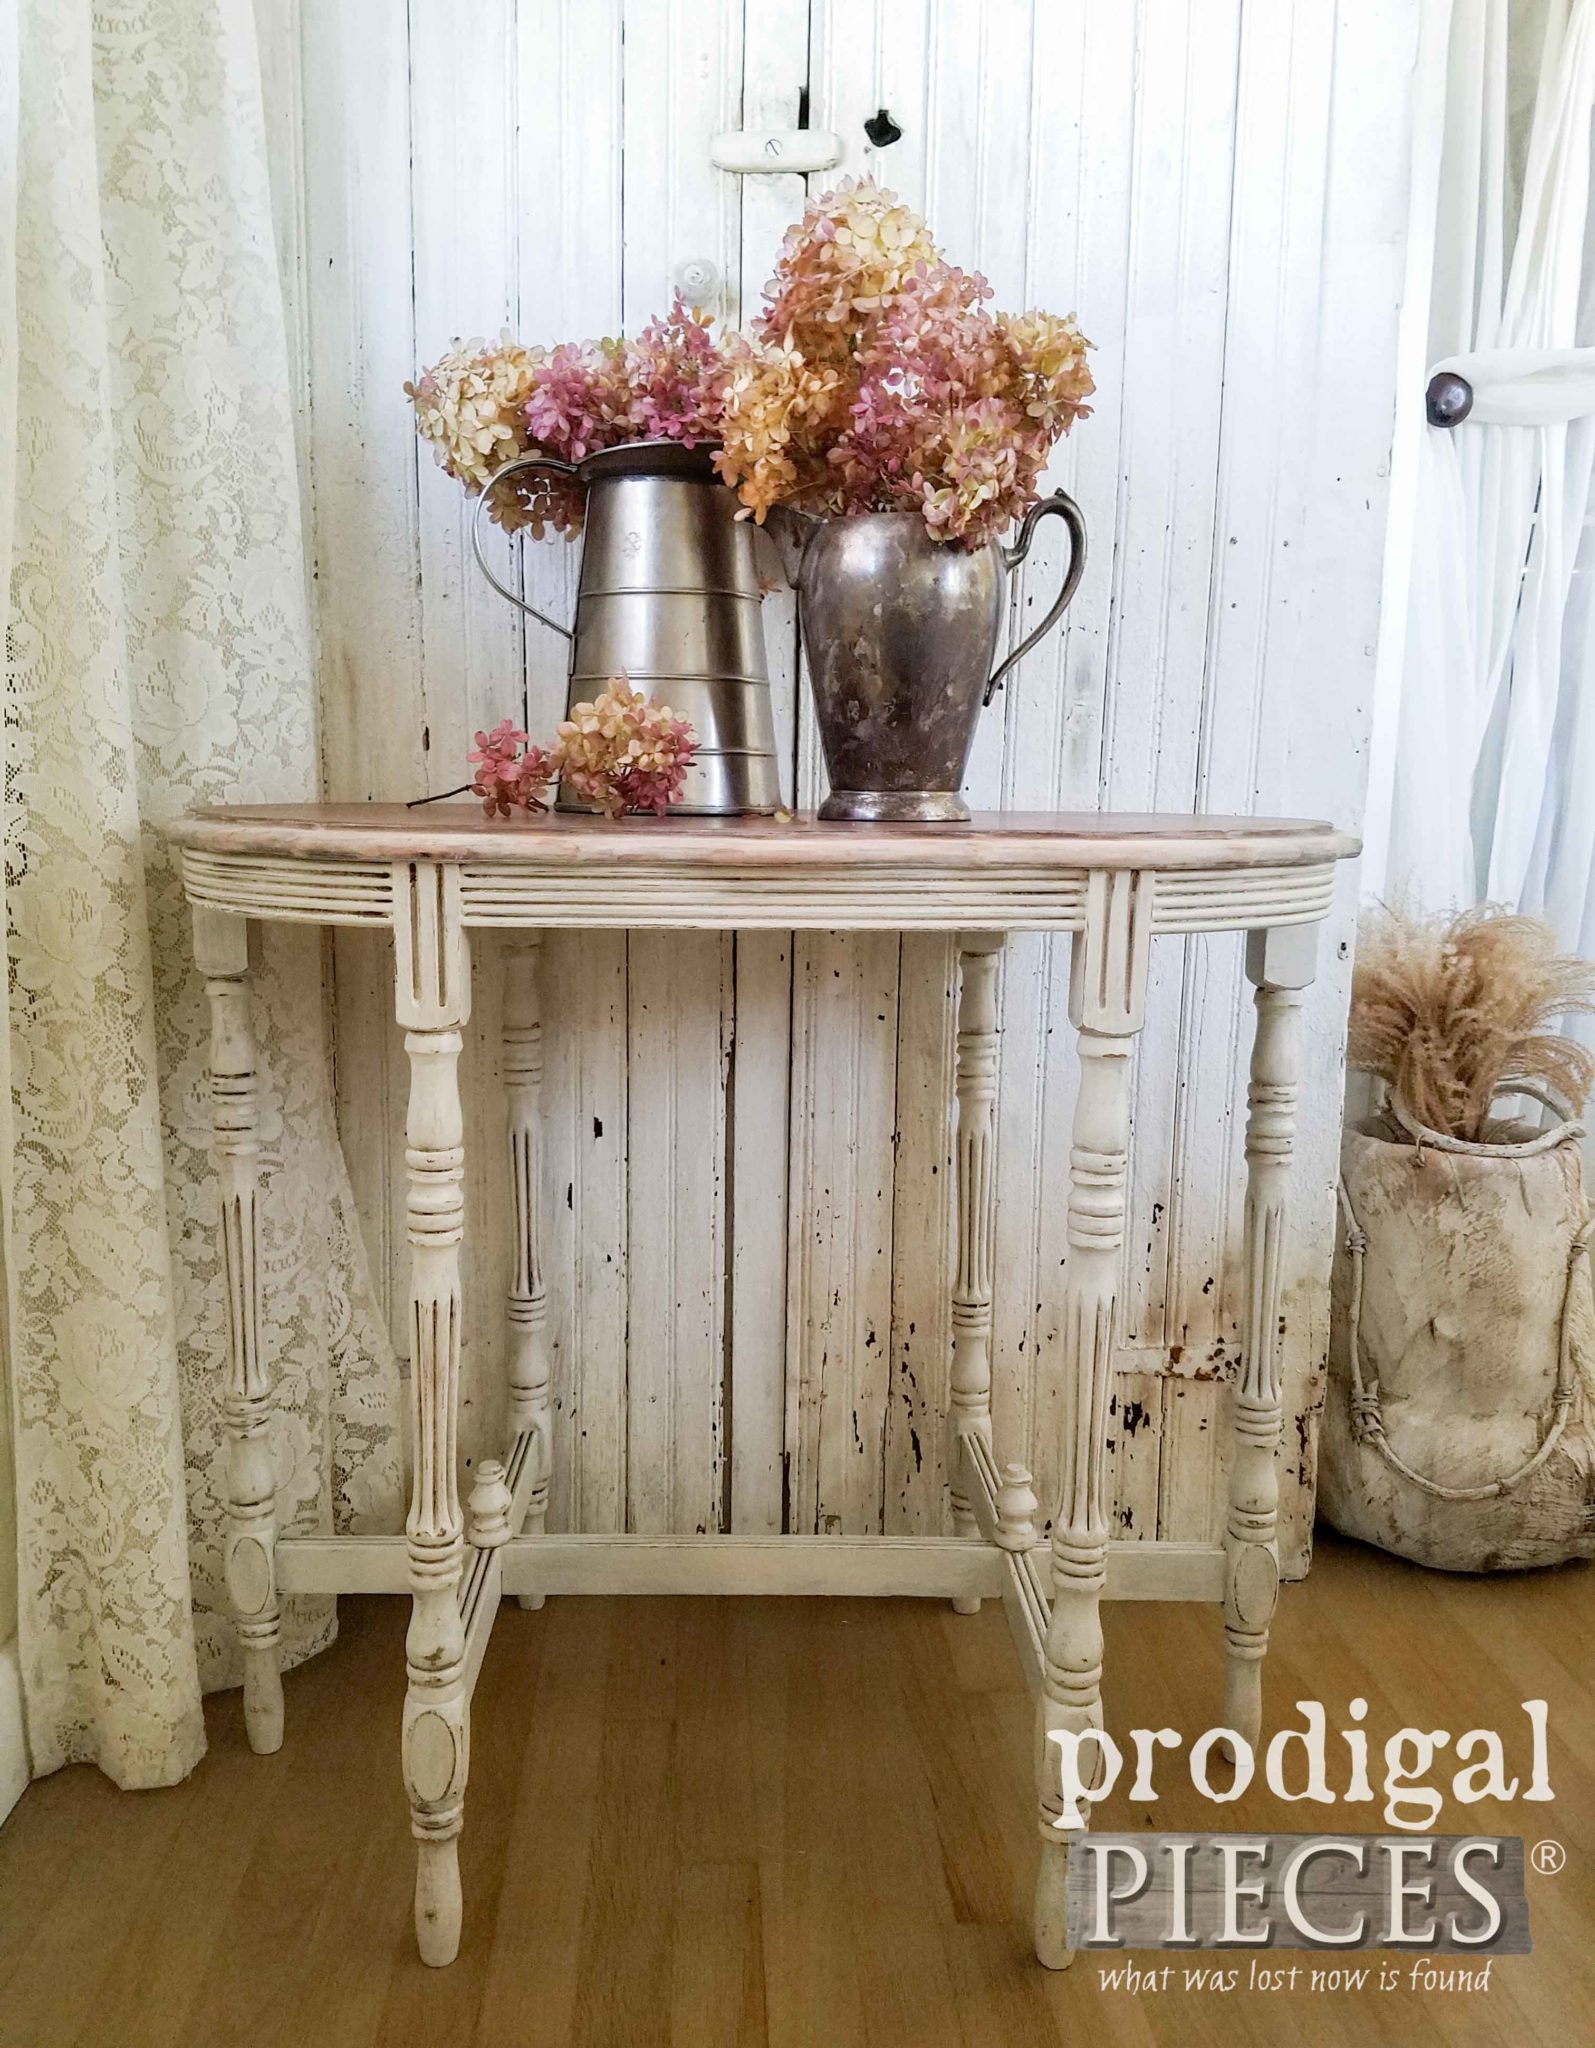 Antique Side Table with Time-worn Finish. Details at Prodigal Pieces | prodigalpieces.com